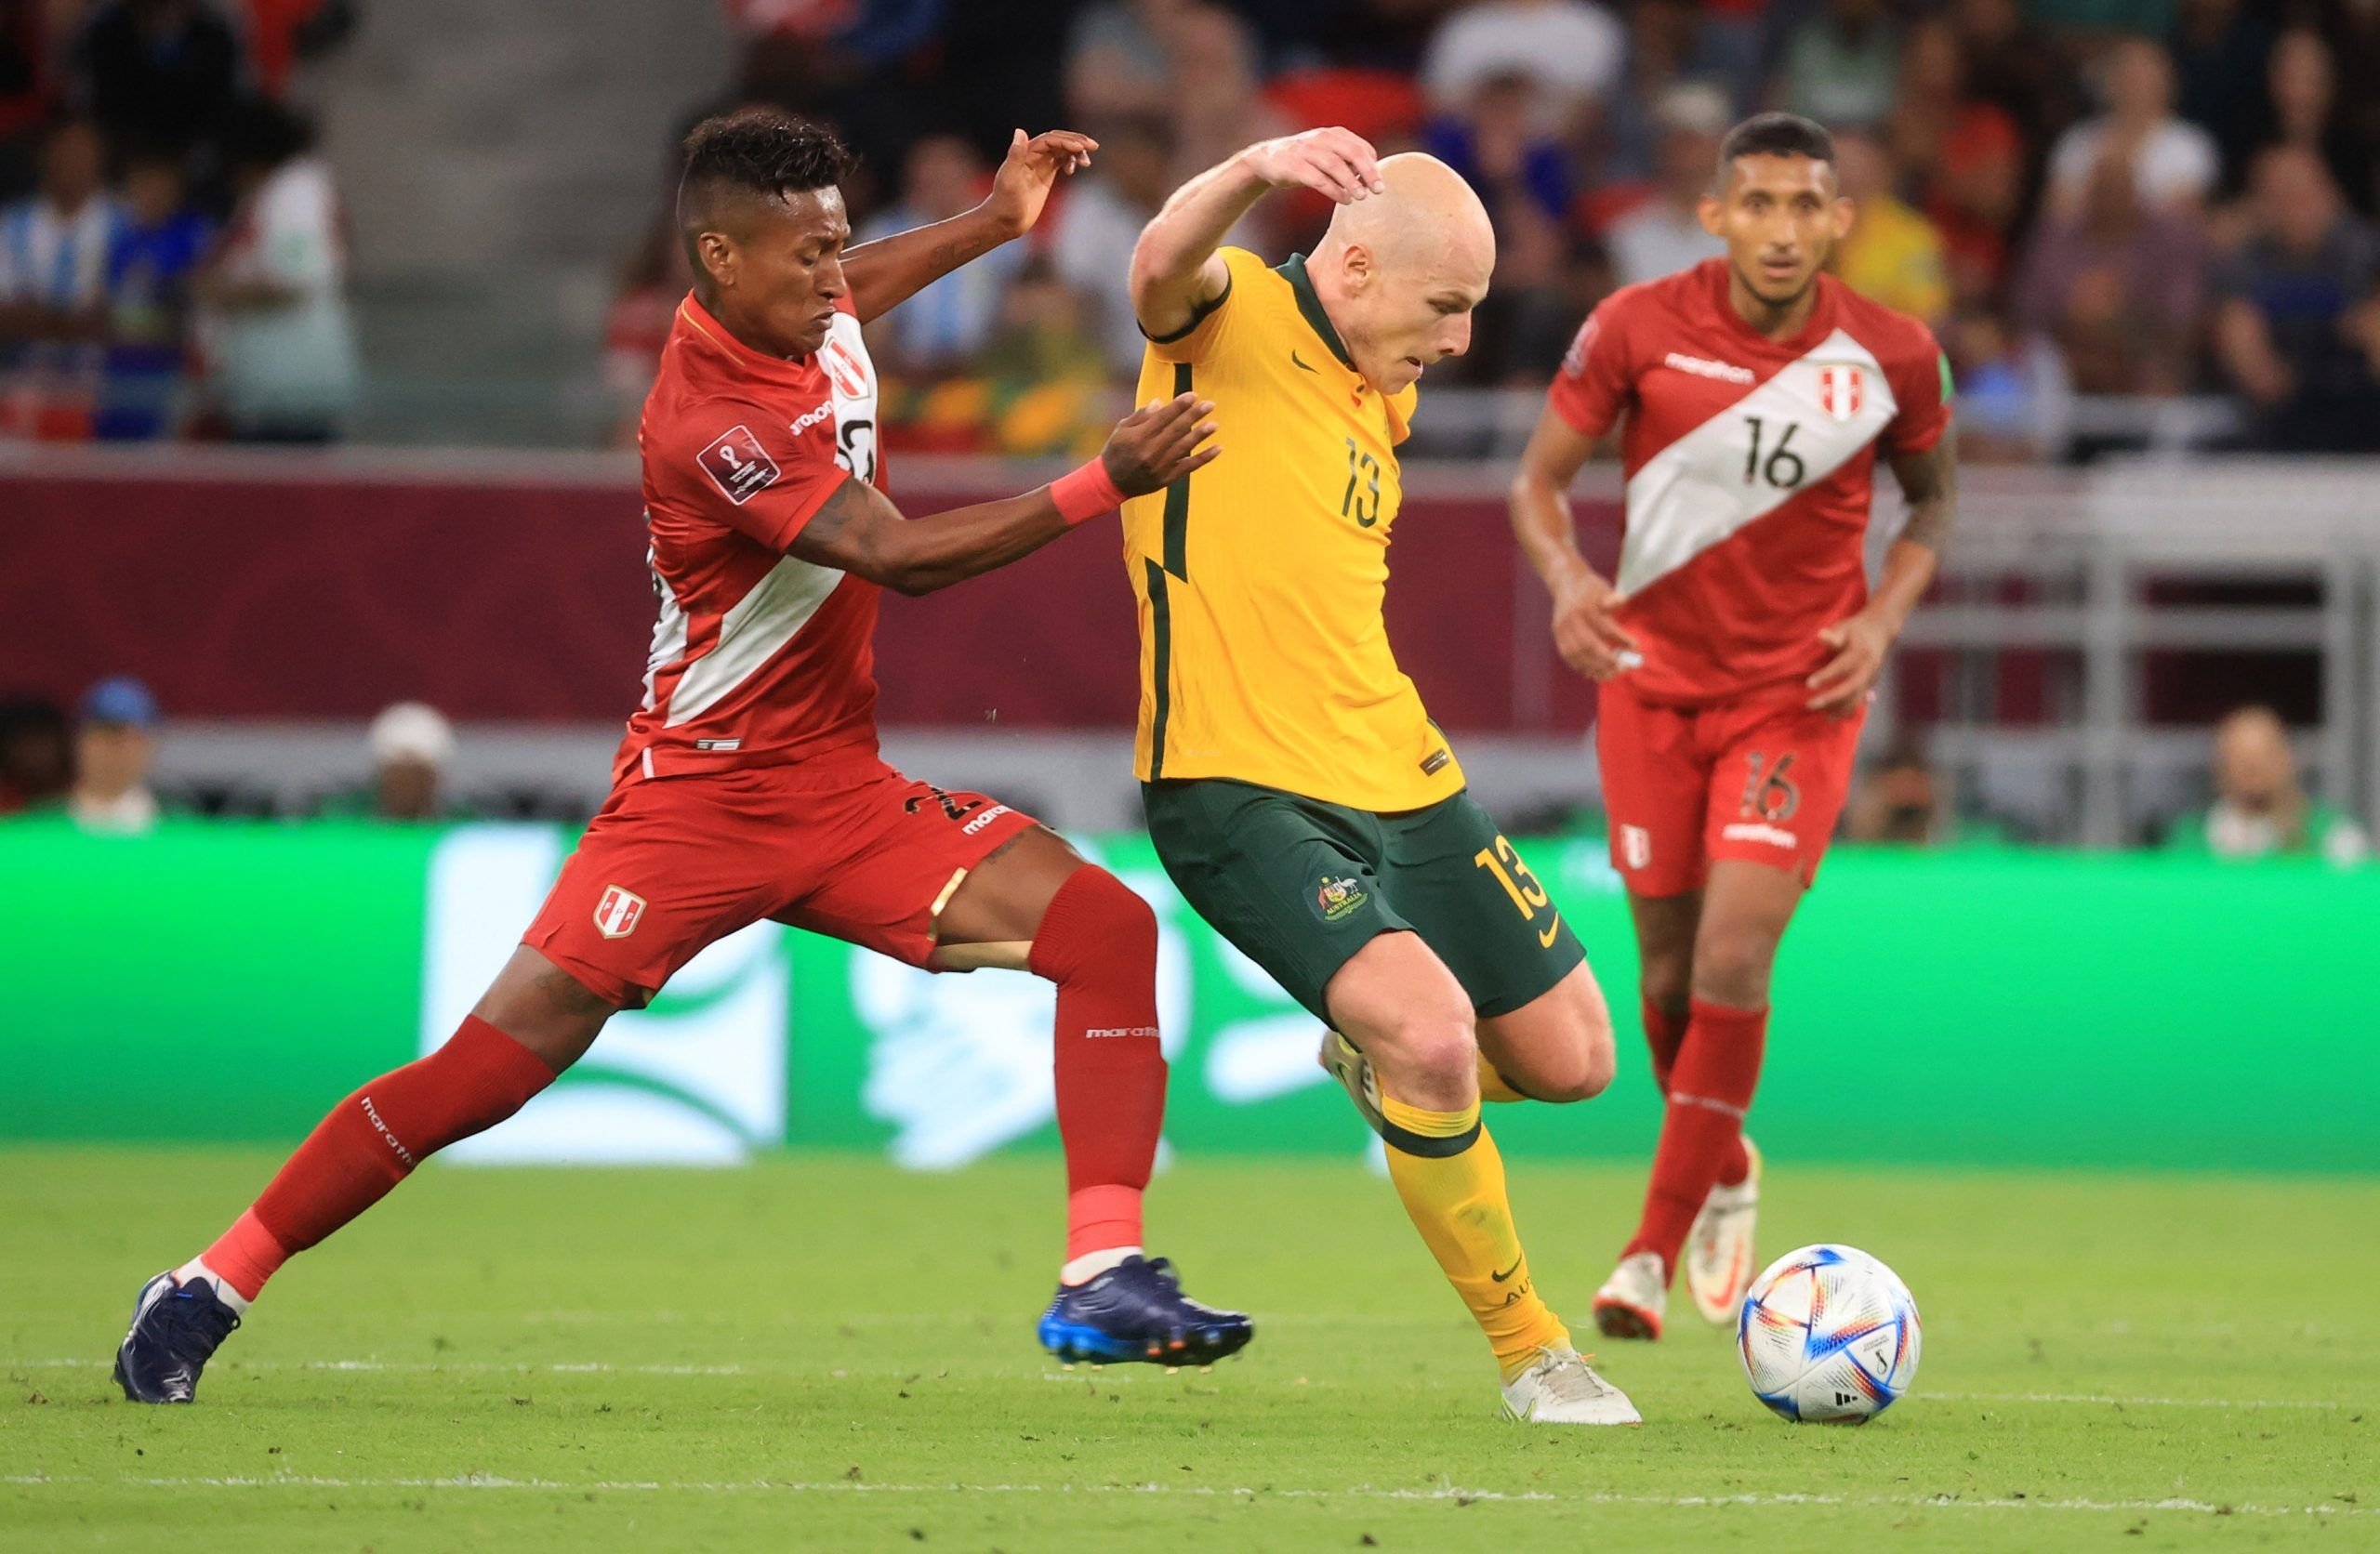 Celtic: Aaron Mooy may not be fully fit for ‘two or three months’ -Celtic News